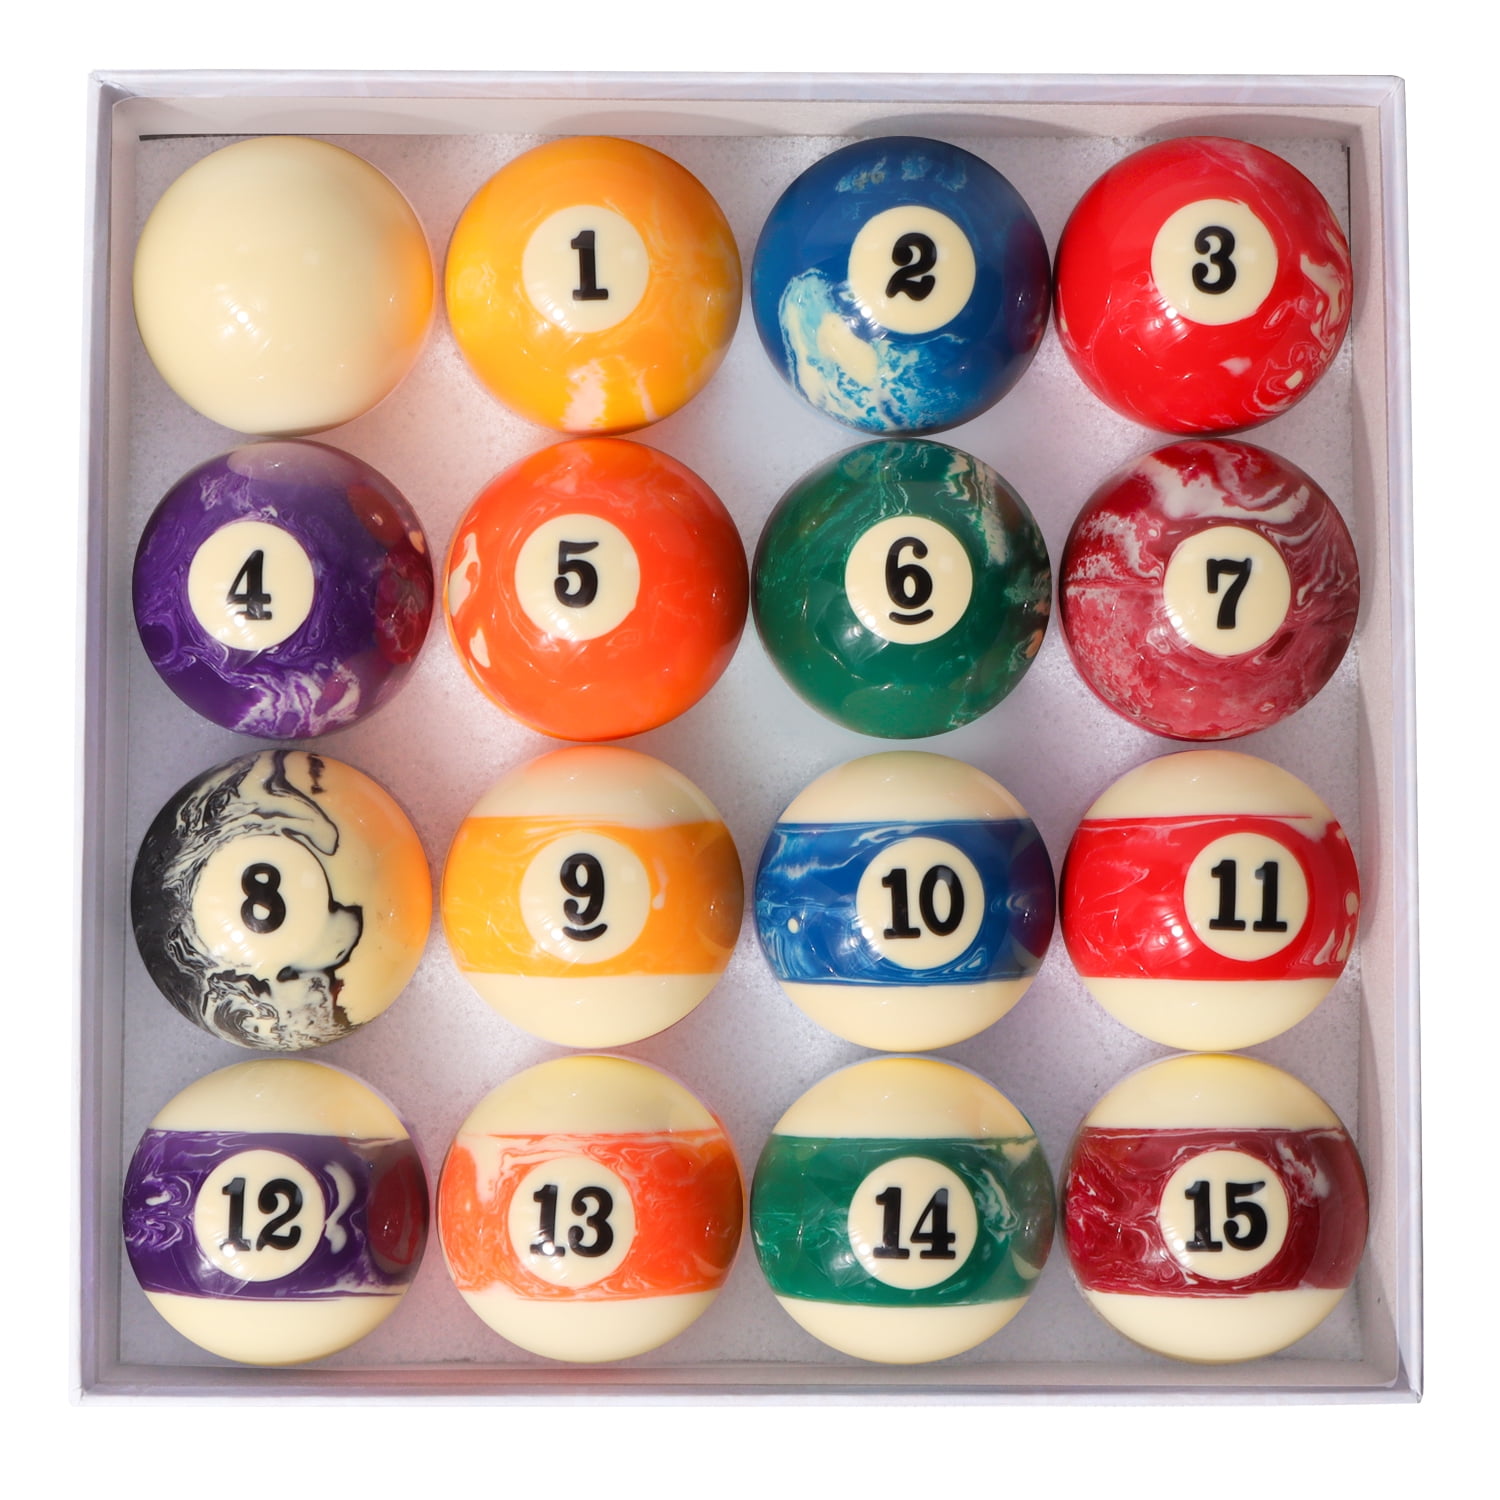 WOODEN POOL TABLE BALL TRIANGLE RACK FOR 2 1/4" AMERICAN STYLE  57mm POOL BALLS. 